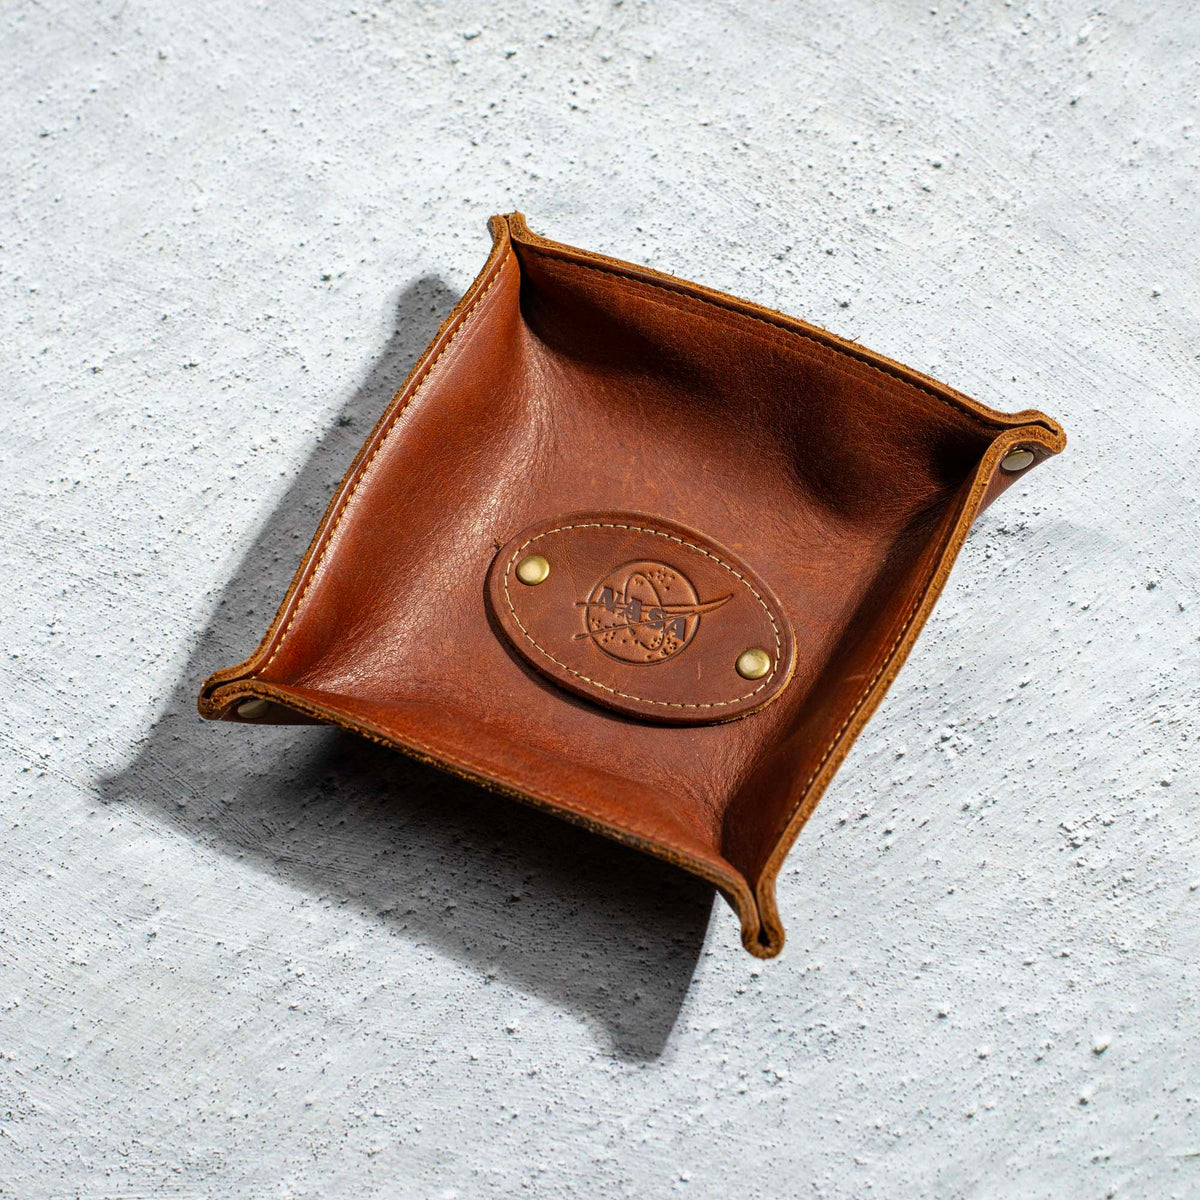 The Nasa Monticello Fine Leather Personalized Desk Valet Caddy Tray for Dresser or Office Gift